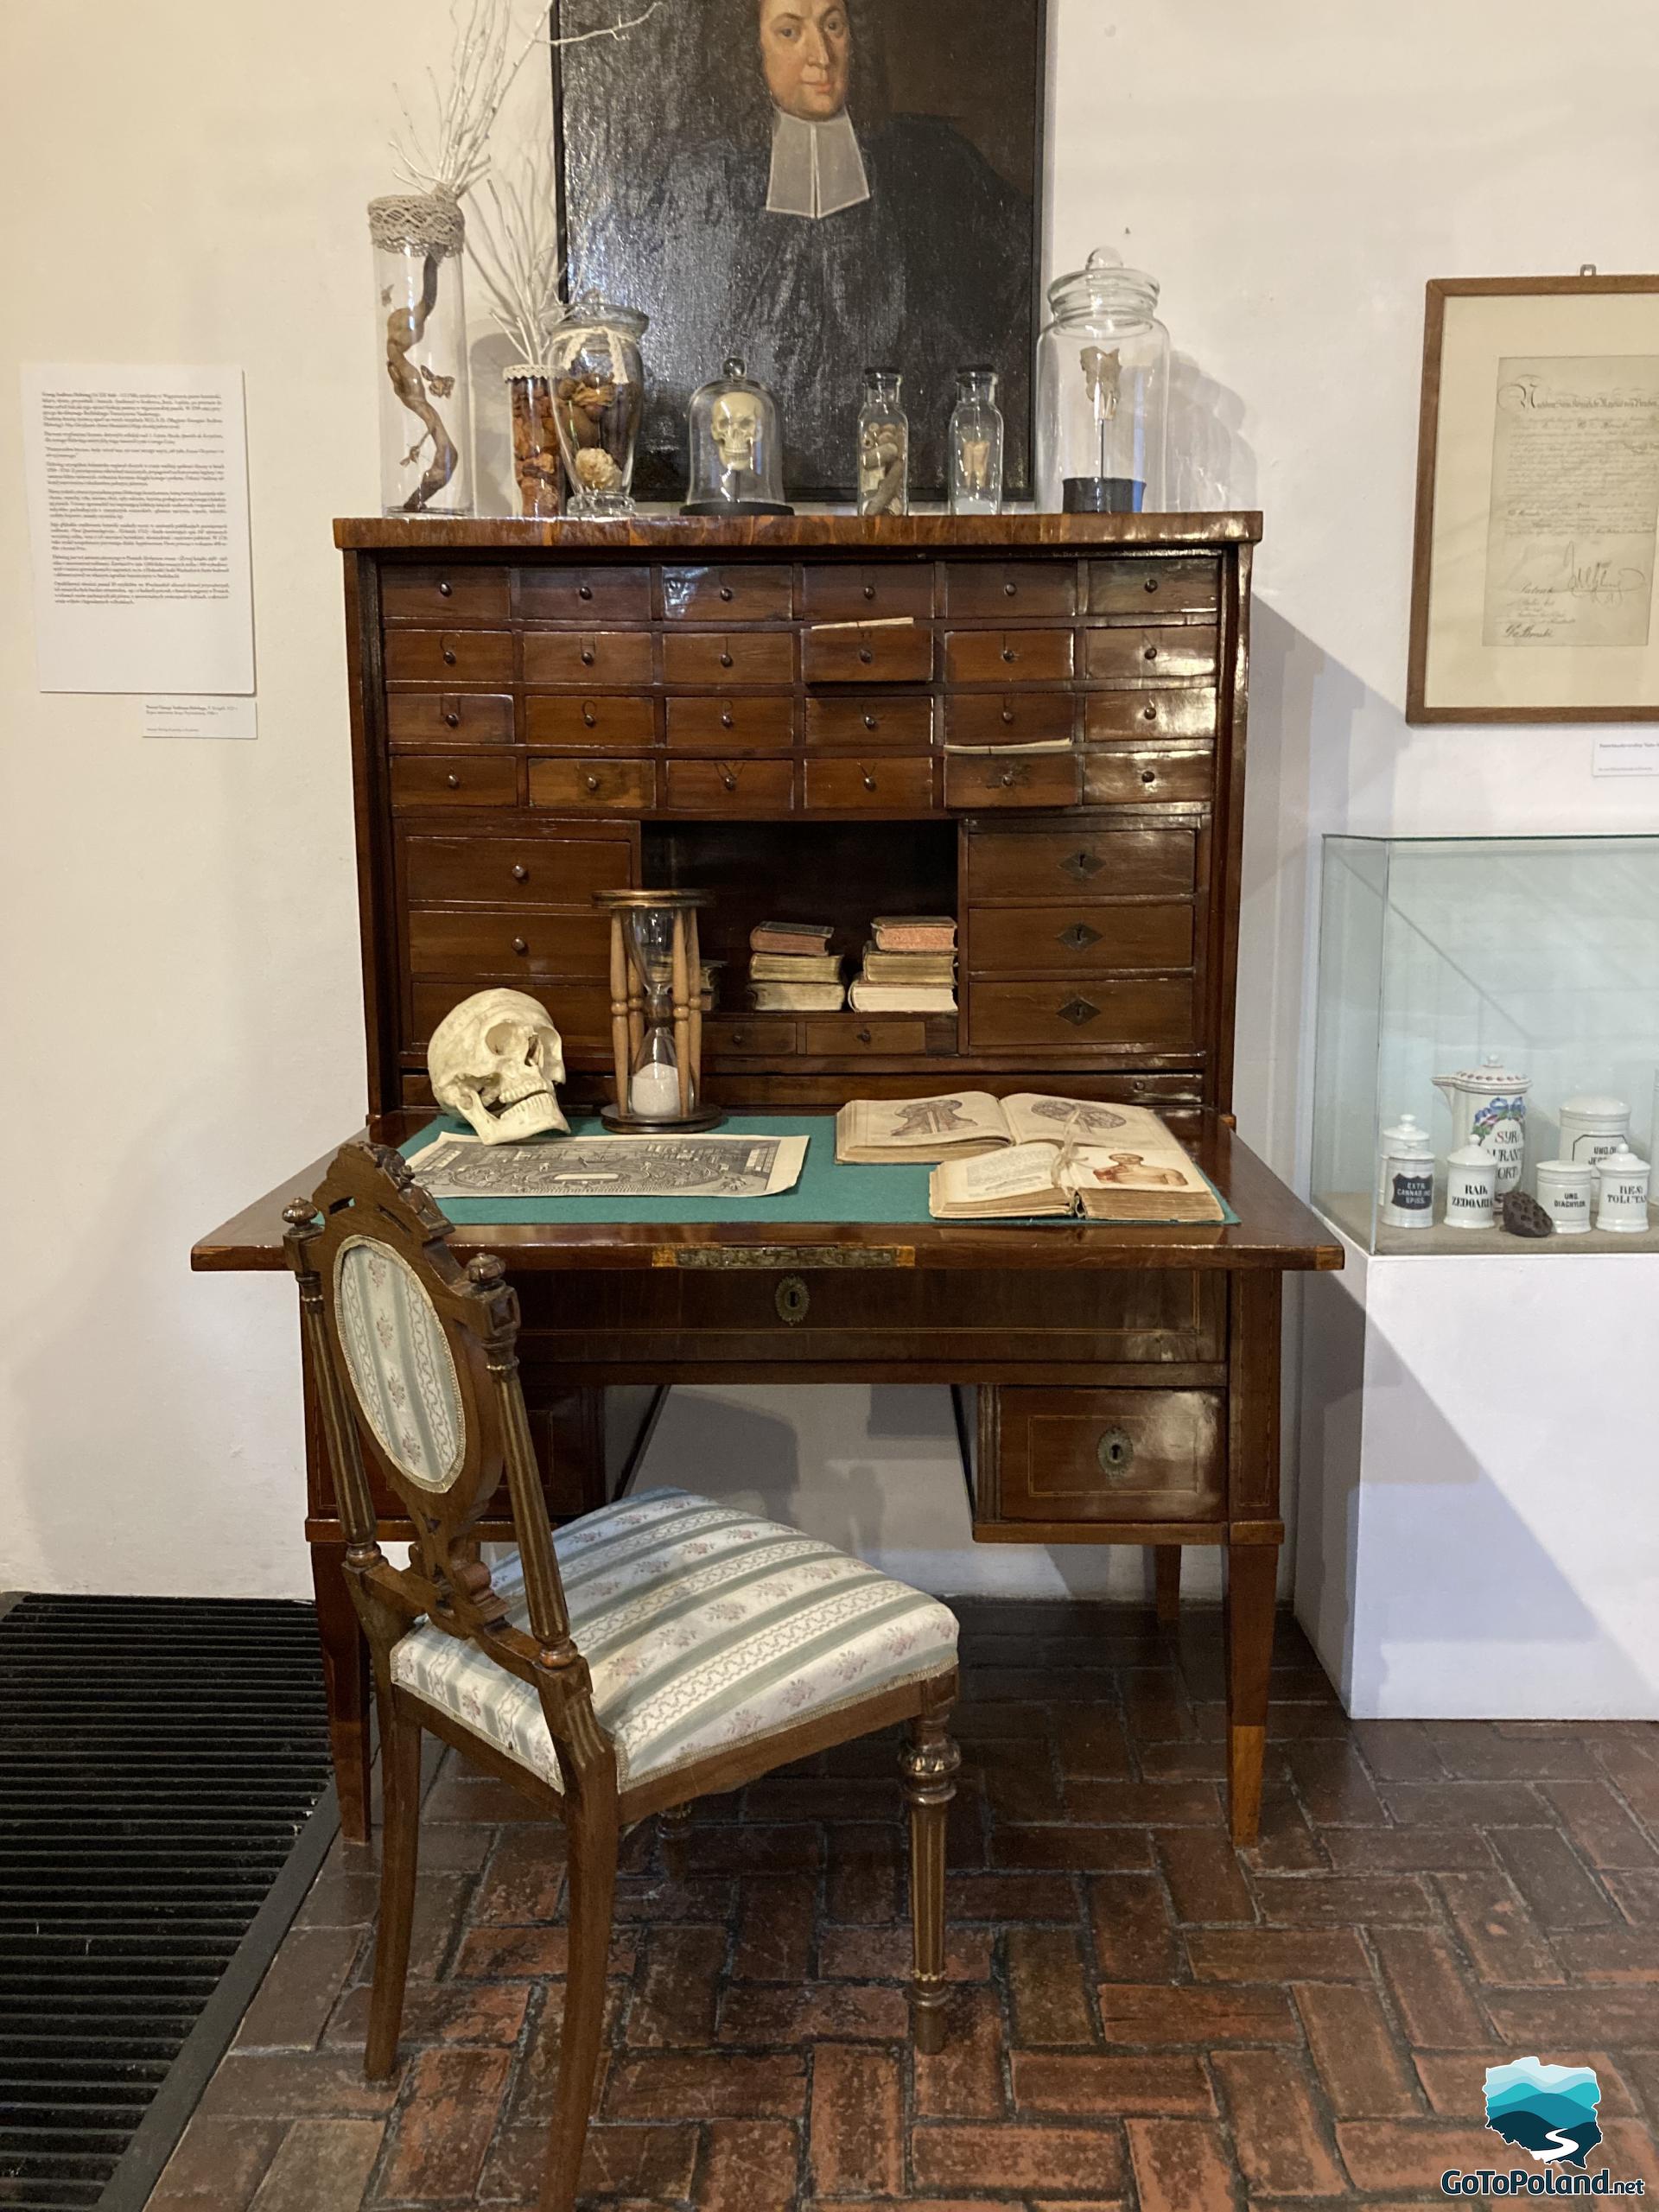 a wooden desk with many drawers where a doctor used to work